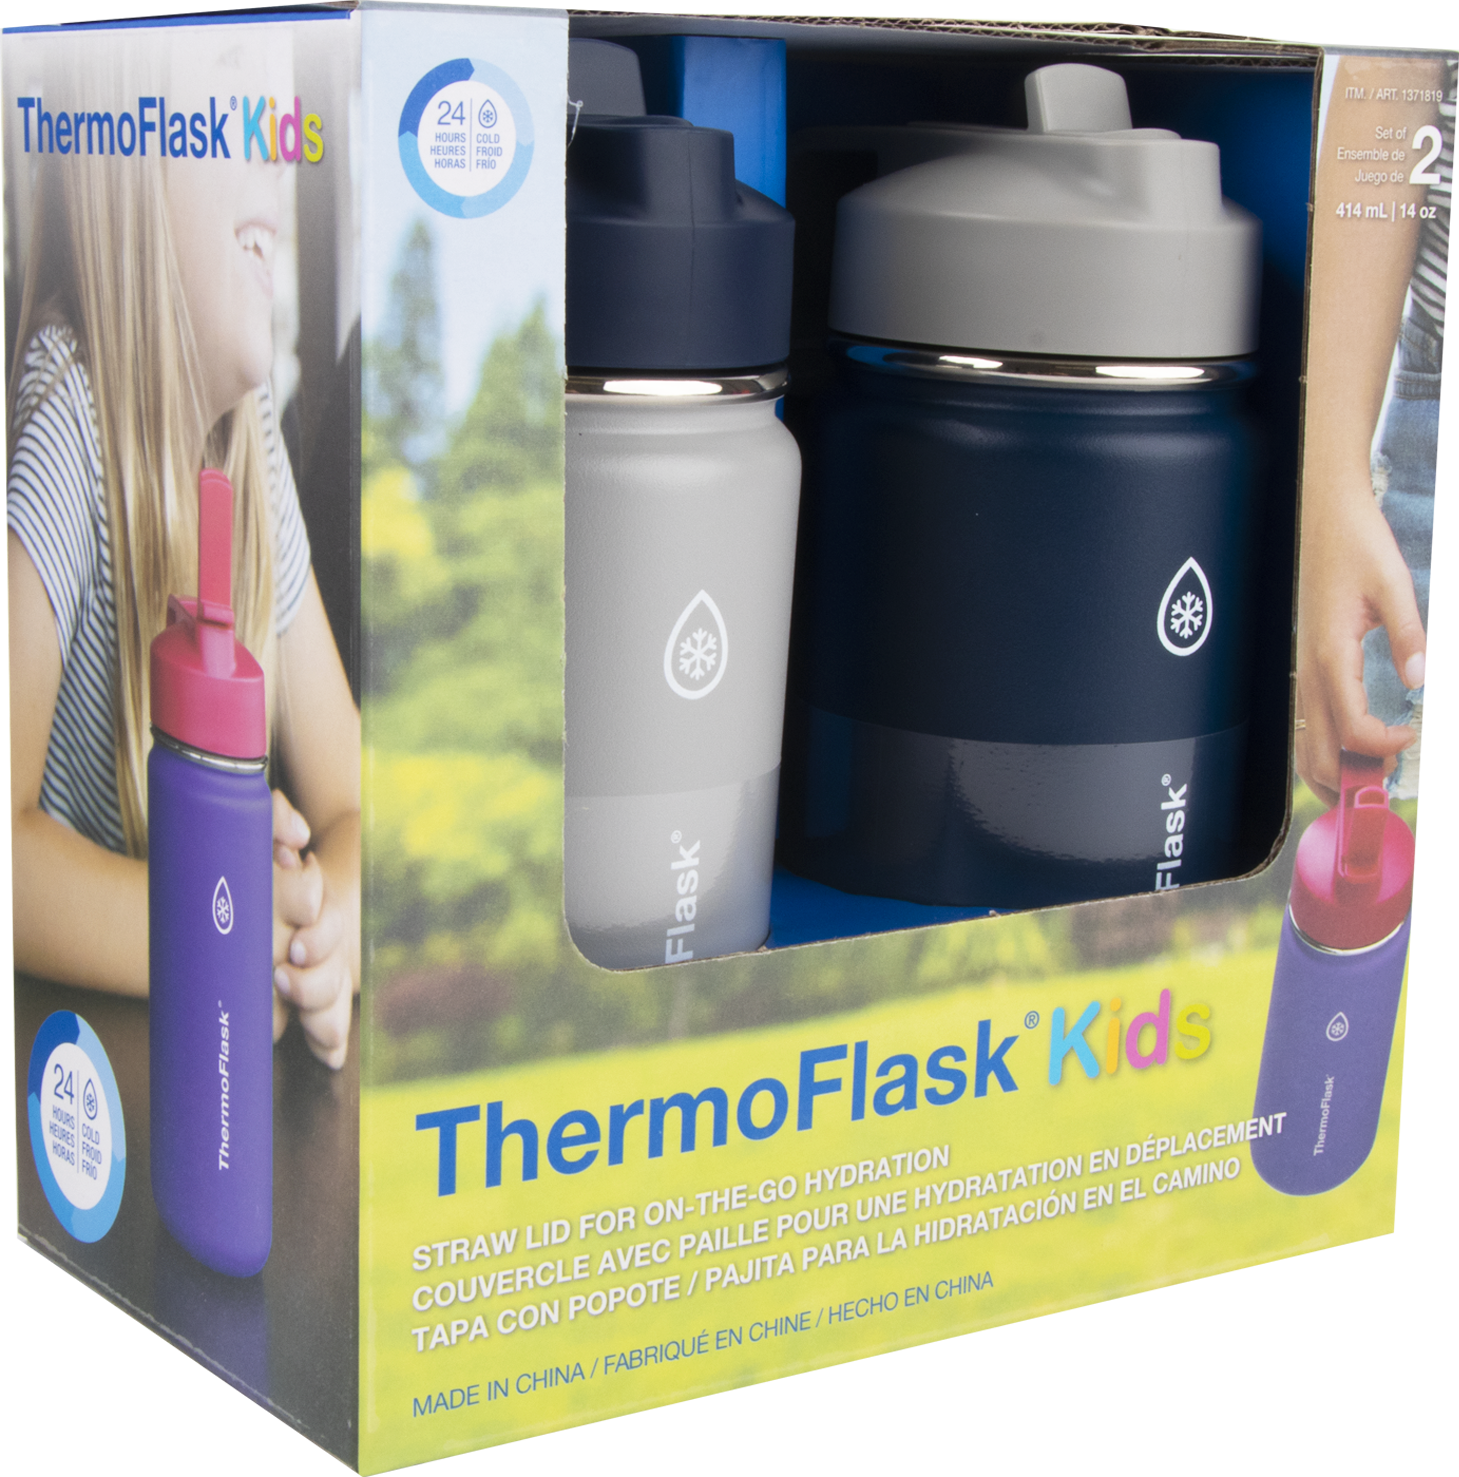 Thermoflask Stainless Steel Kids Bottles with Straw Lid ,BPA-free, 16 Ounces, 2 Count